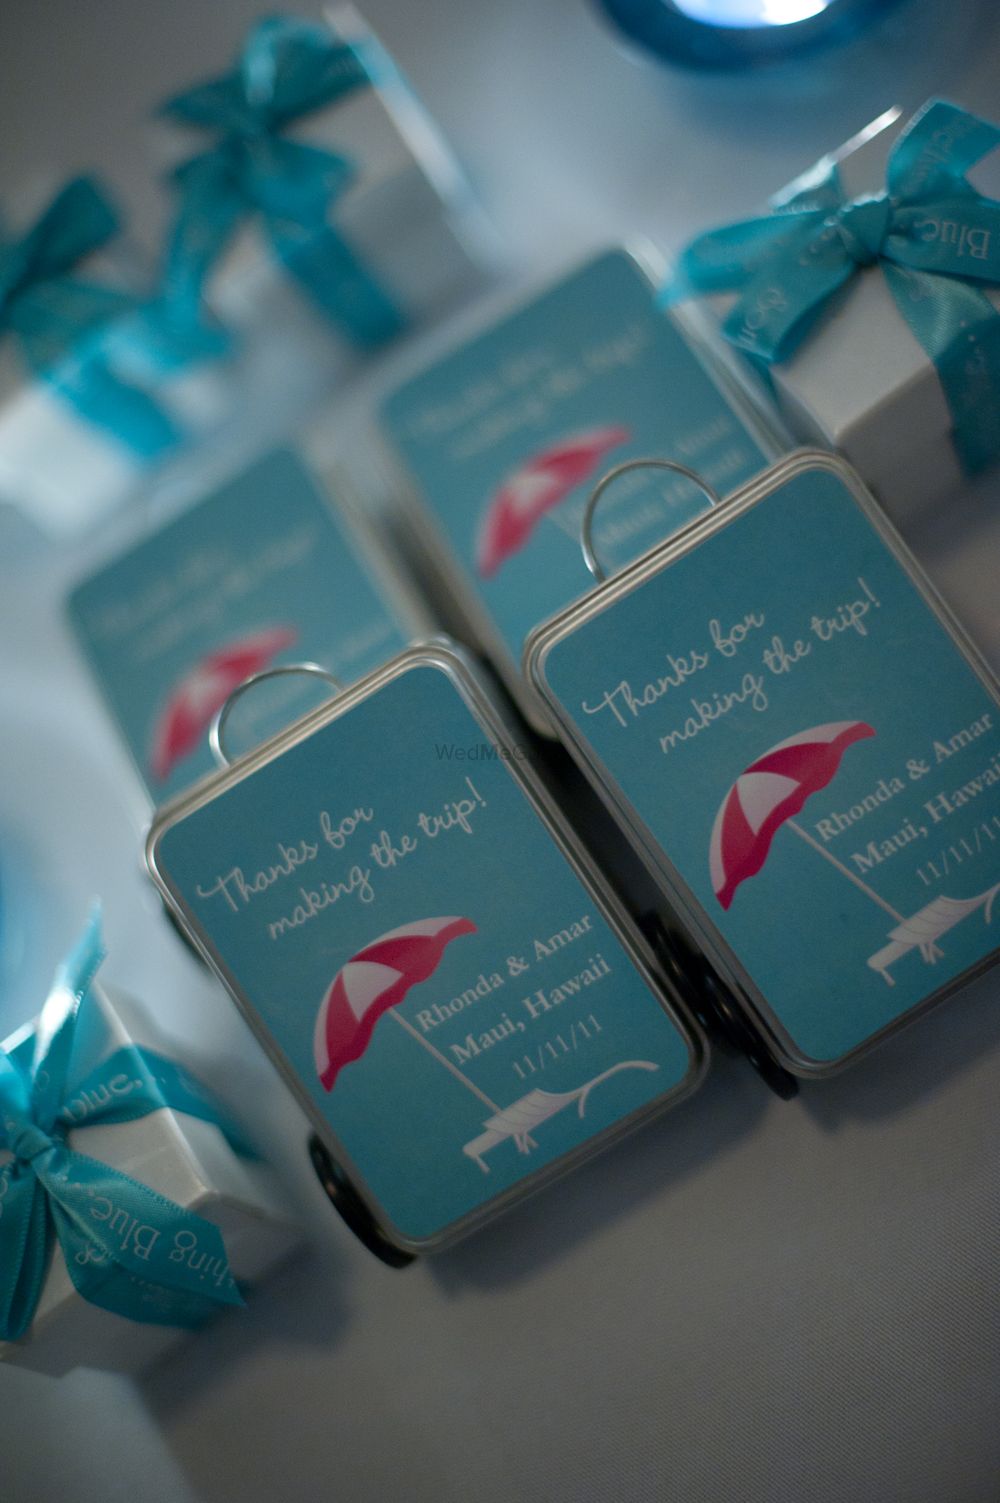 Photo of Cute suitcase favors for wedding